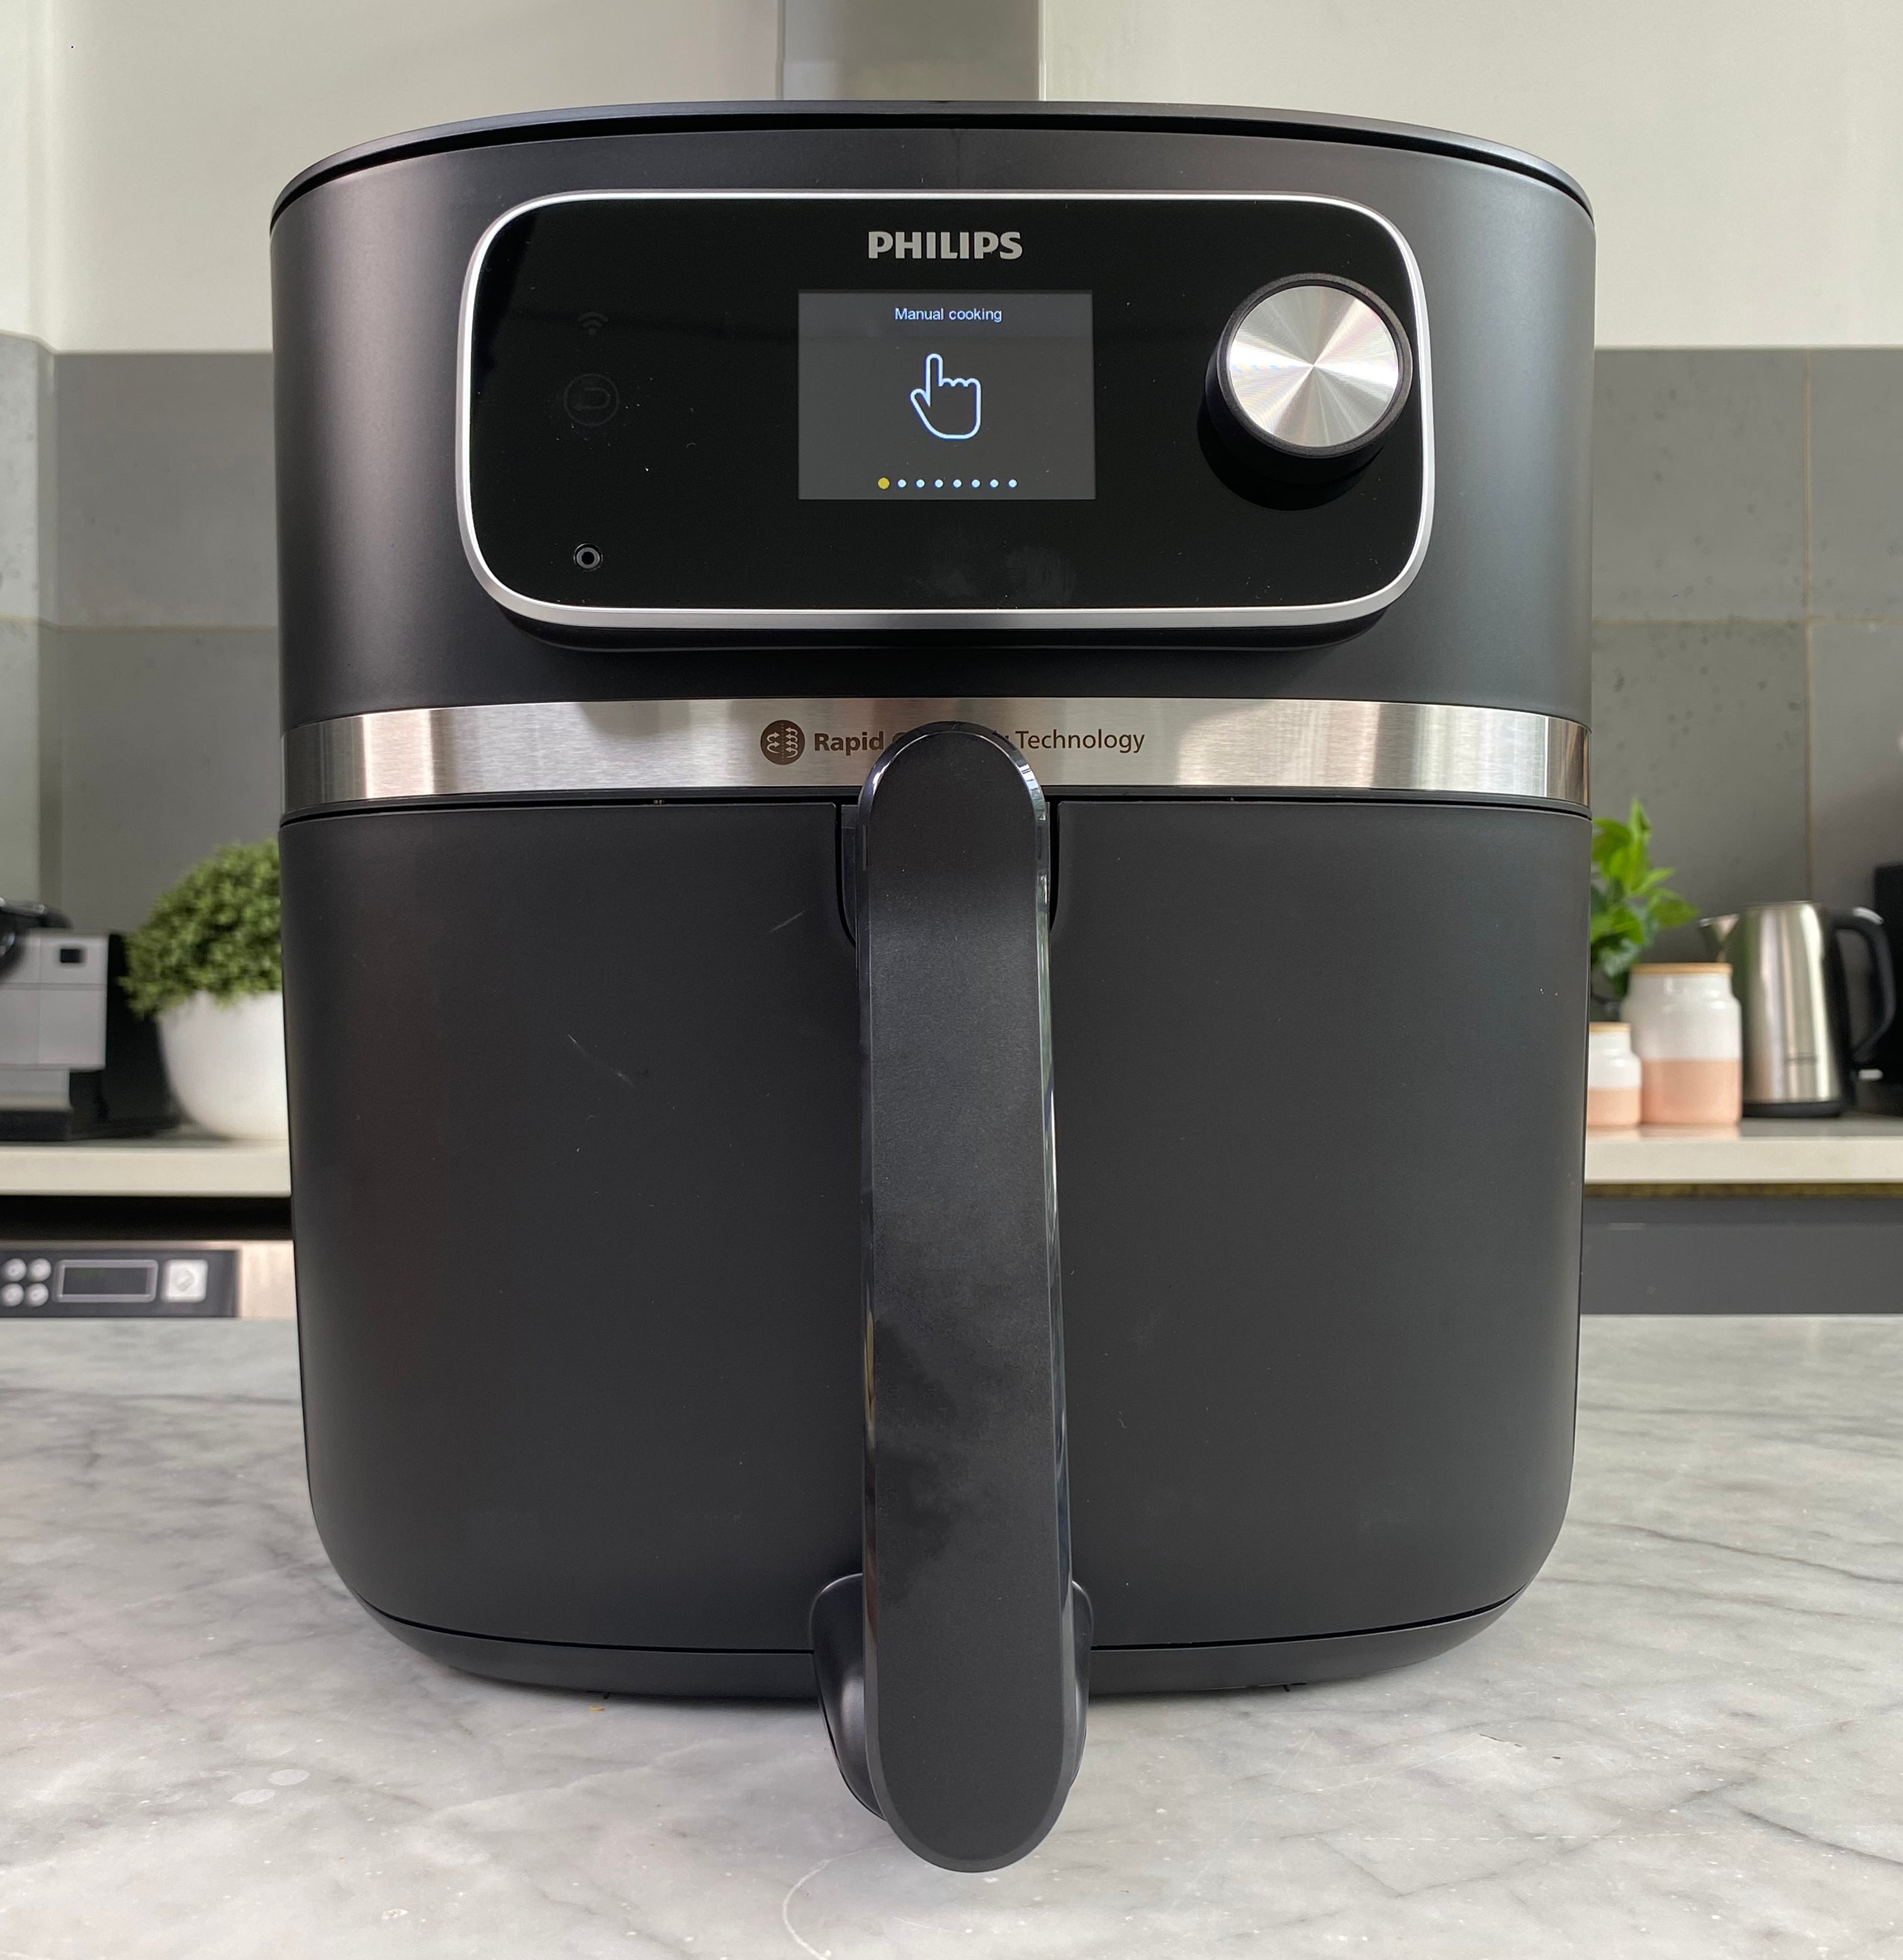 A Philips air fryer sits on a kitchen counter